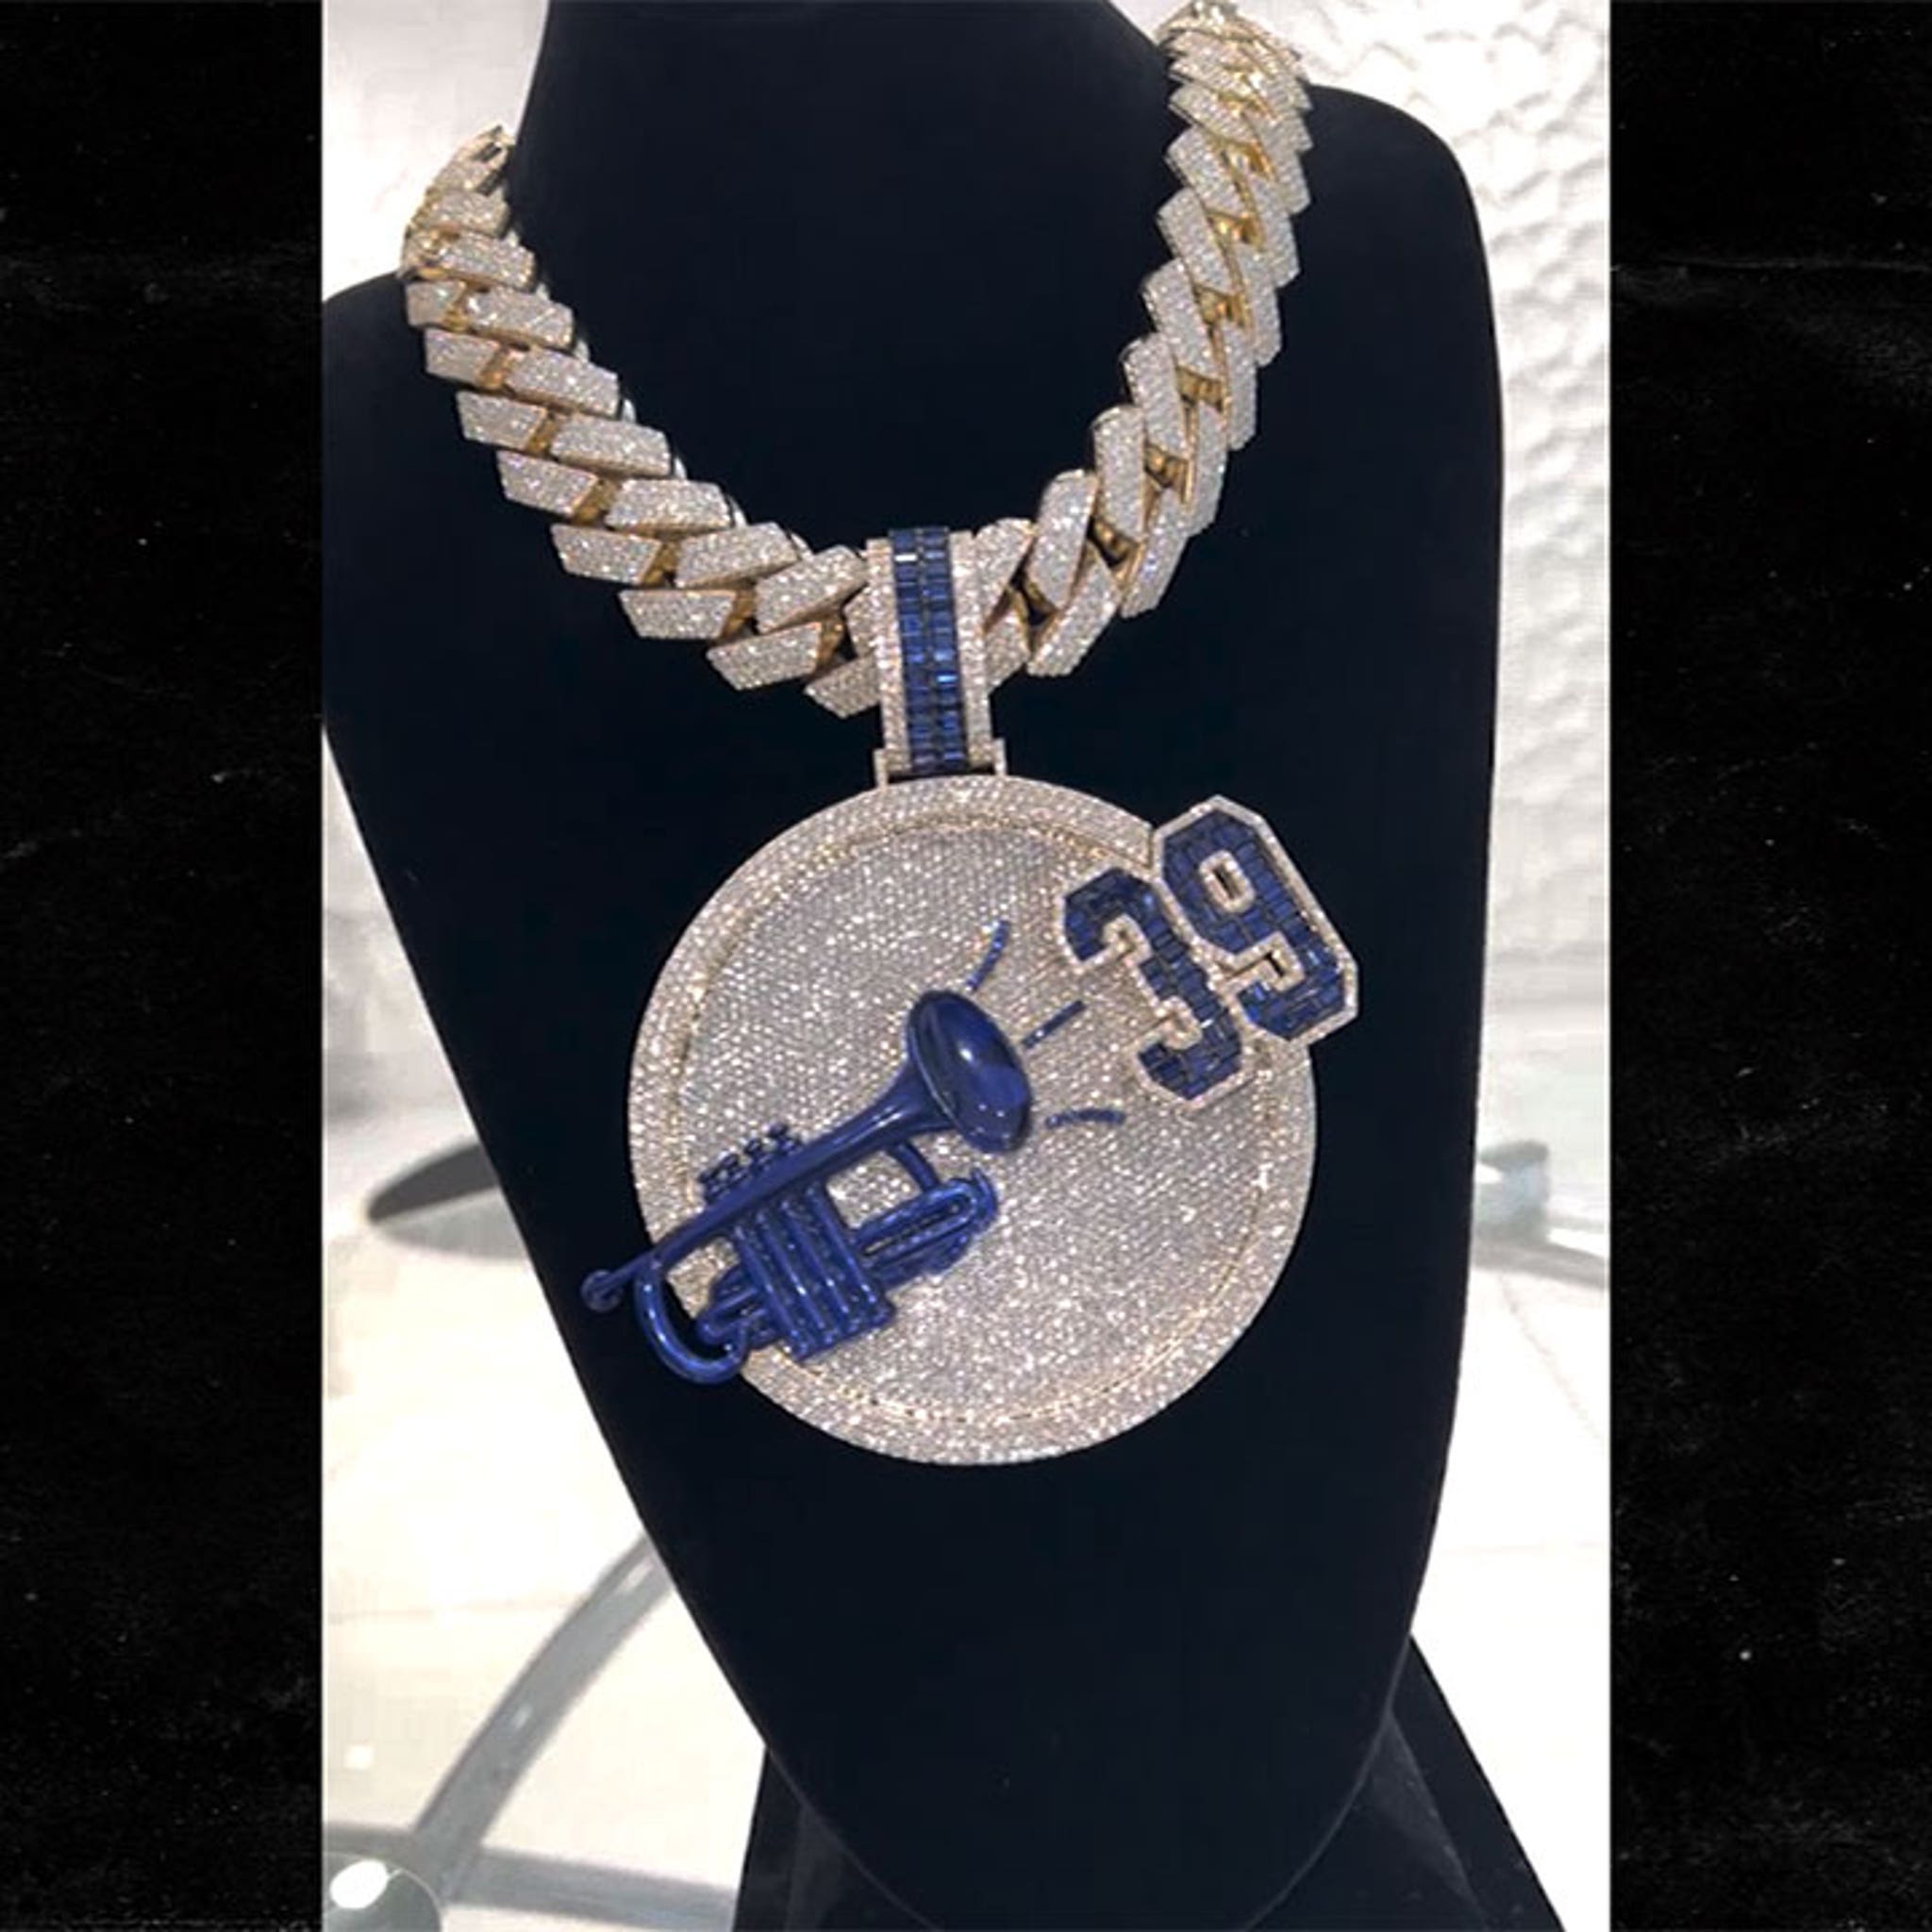 Mets Star Edwin Diaz Cops Iced-Out Trumpet Chain Worth $250,000!